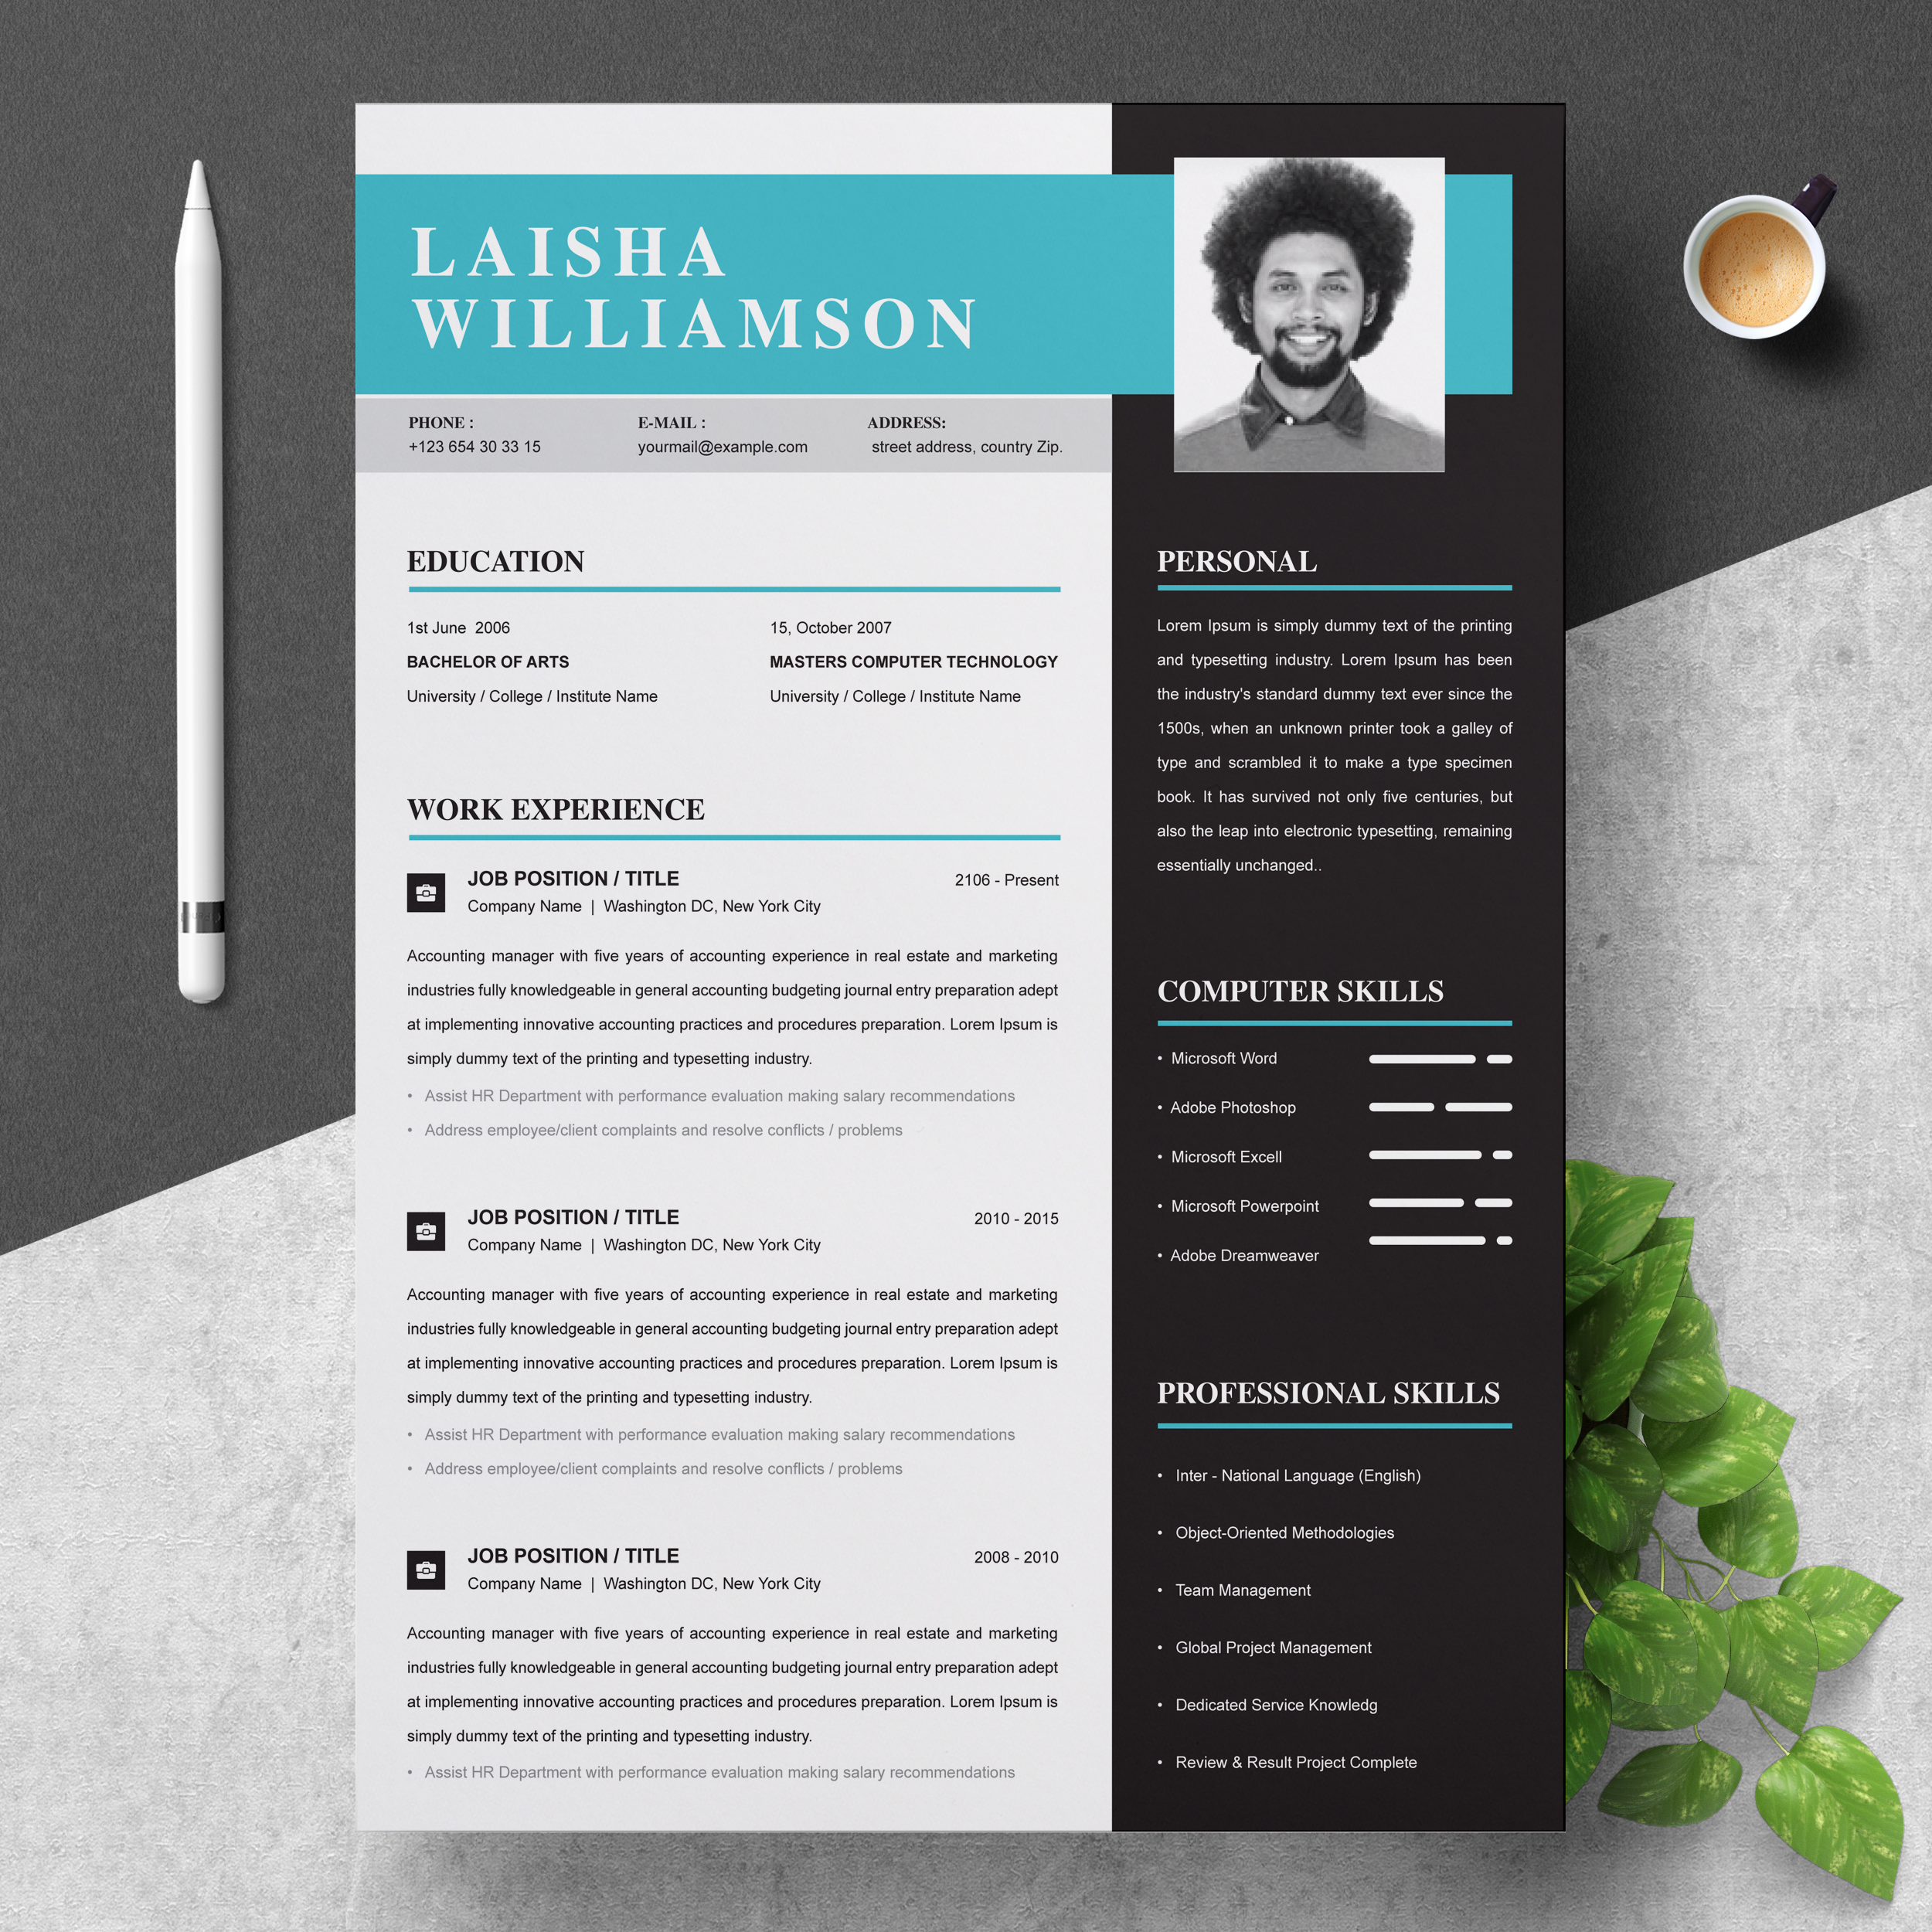 Curriculum Vitae Template Pages from resumeinventor.com